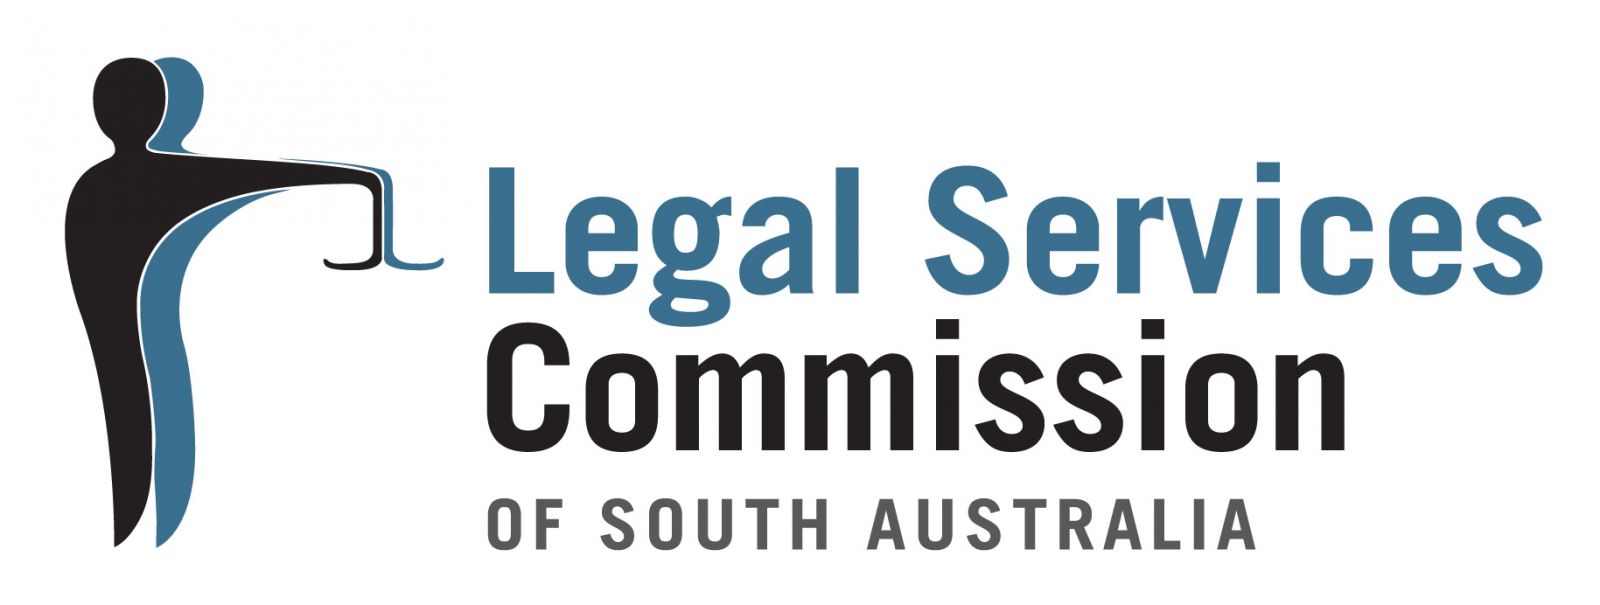 The Legal Services Commission of South Australia provides